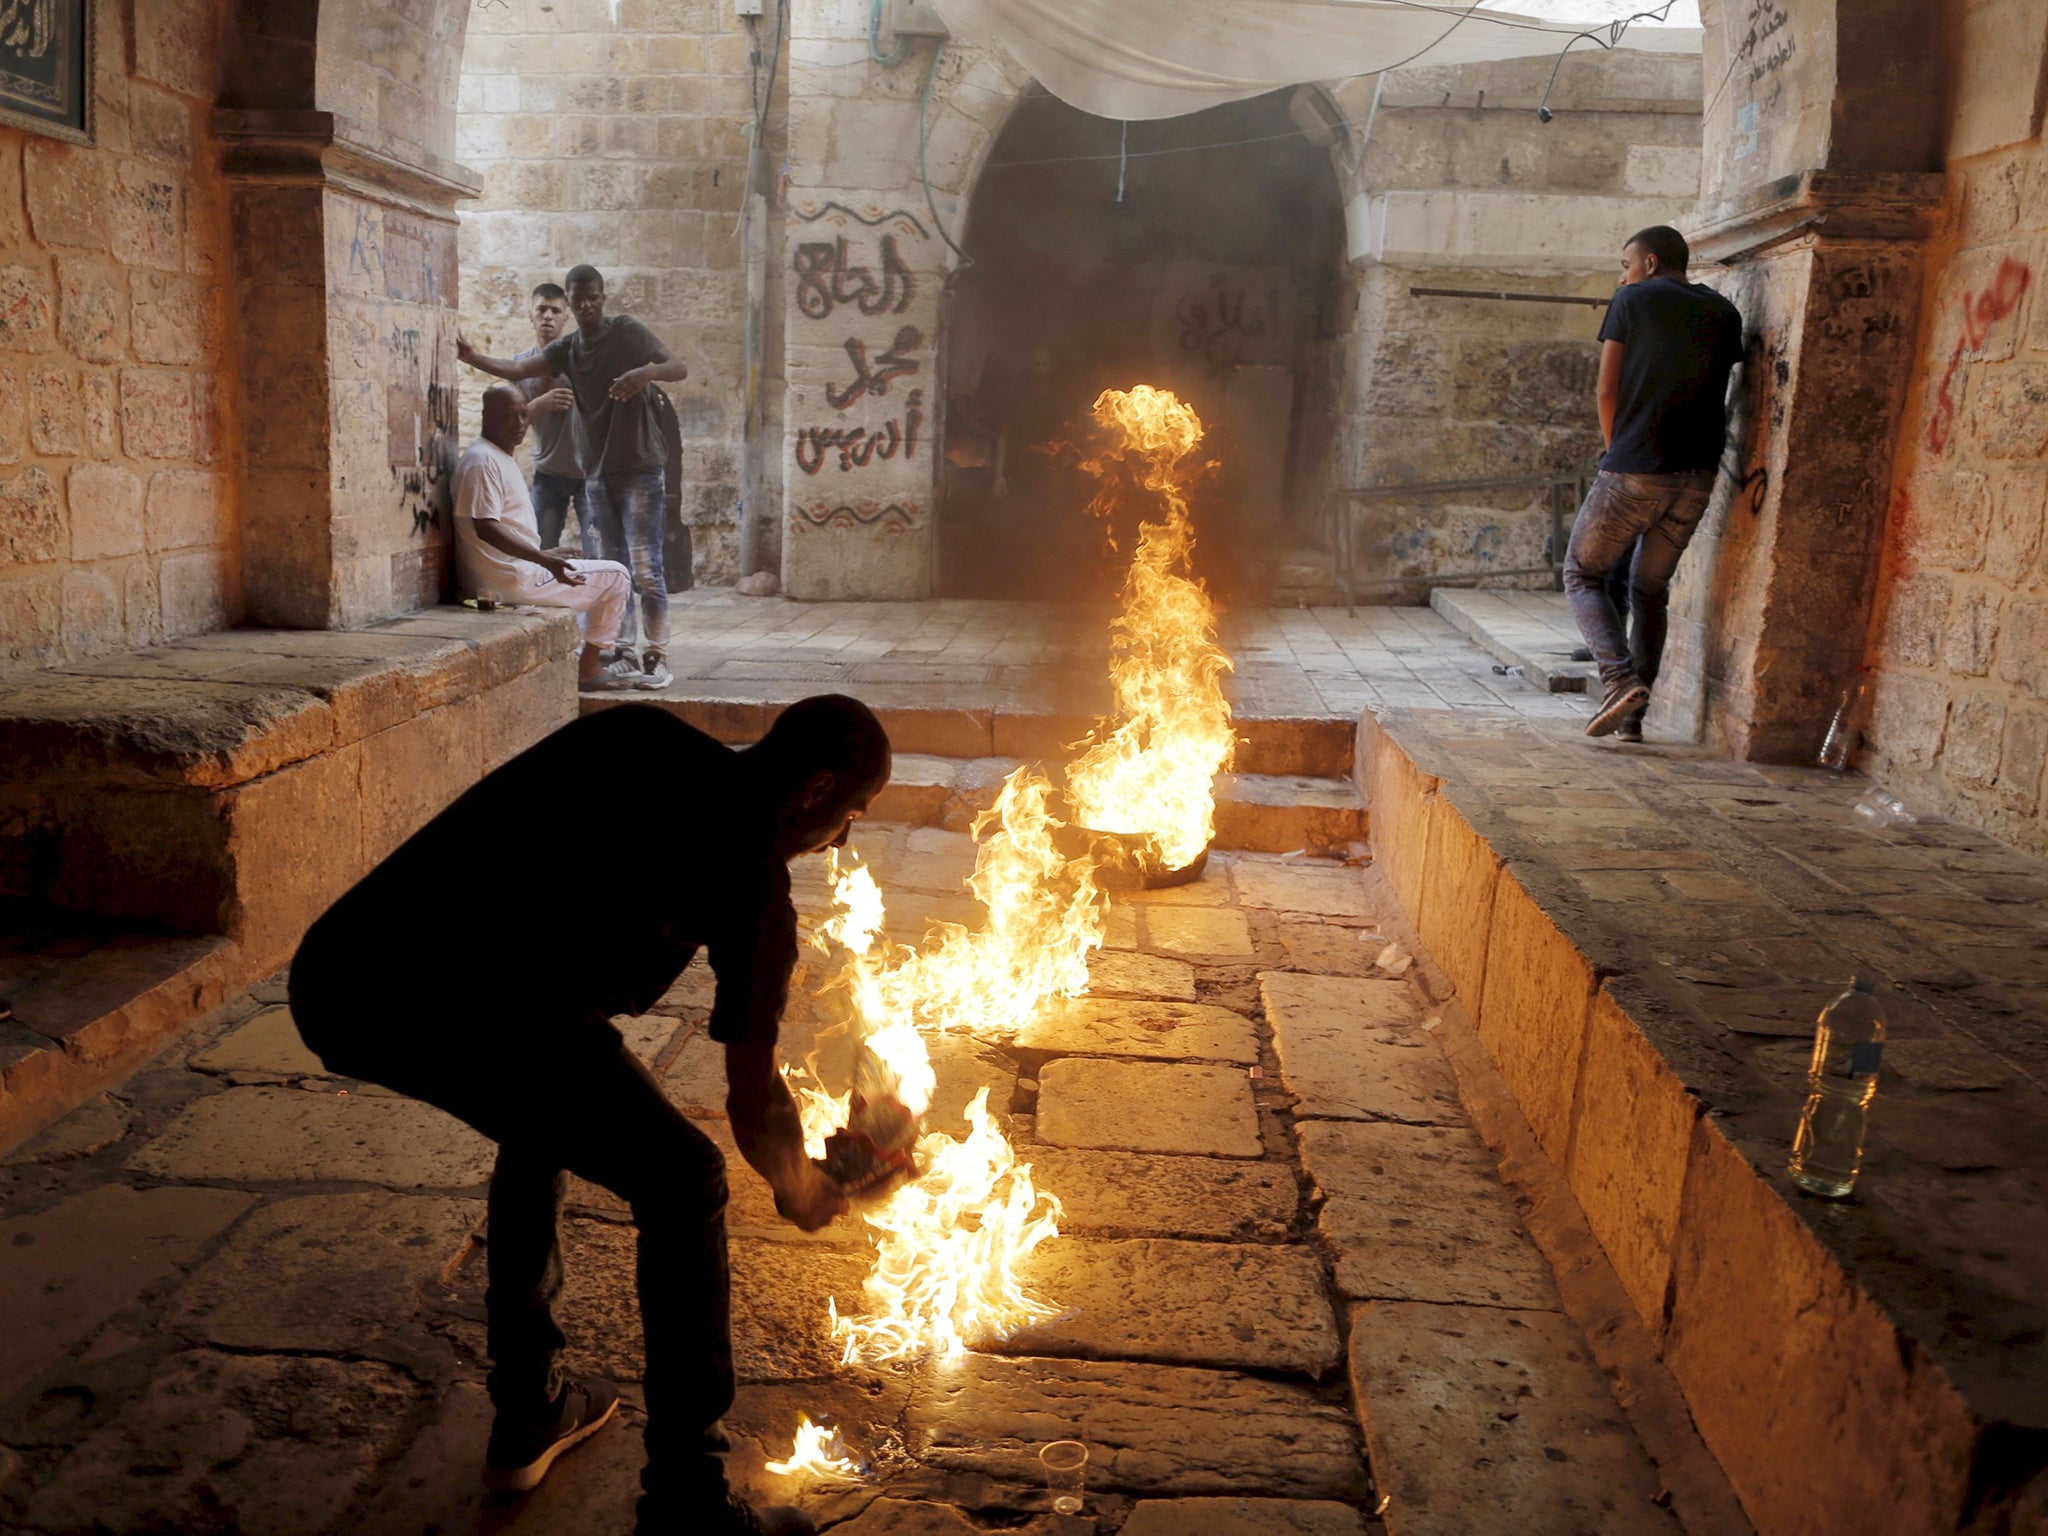 A Palestinian protester kicks a burning tyre during clashes between Palestinians and Israeli police officers in Jerusalem's Old City